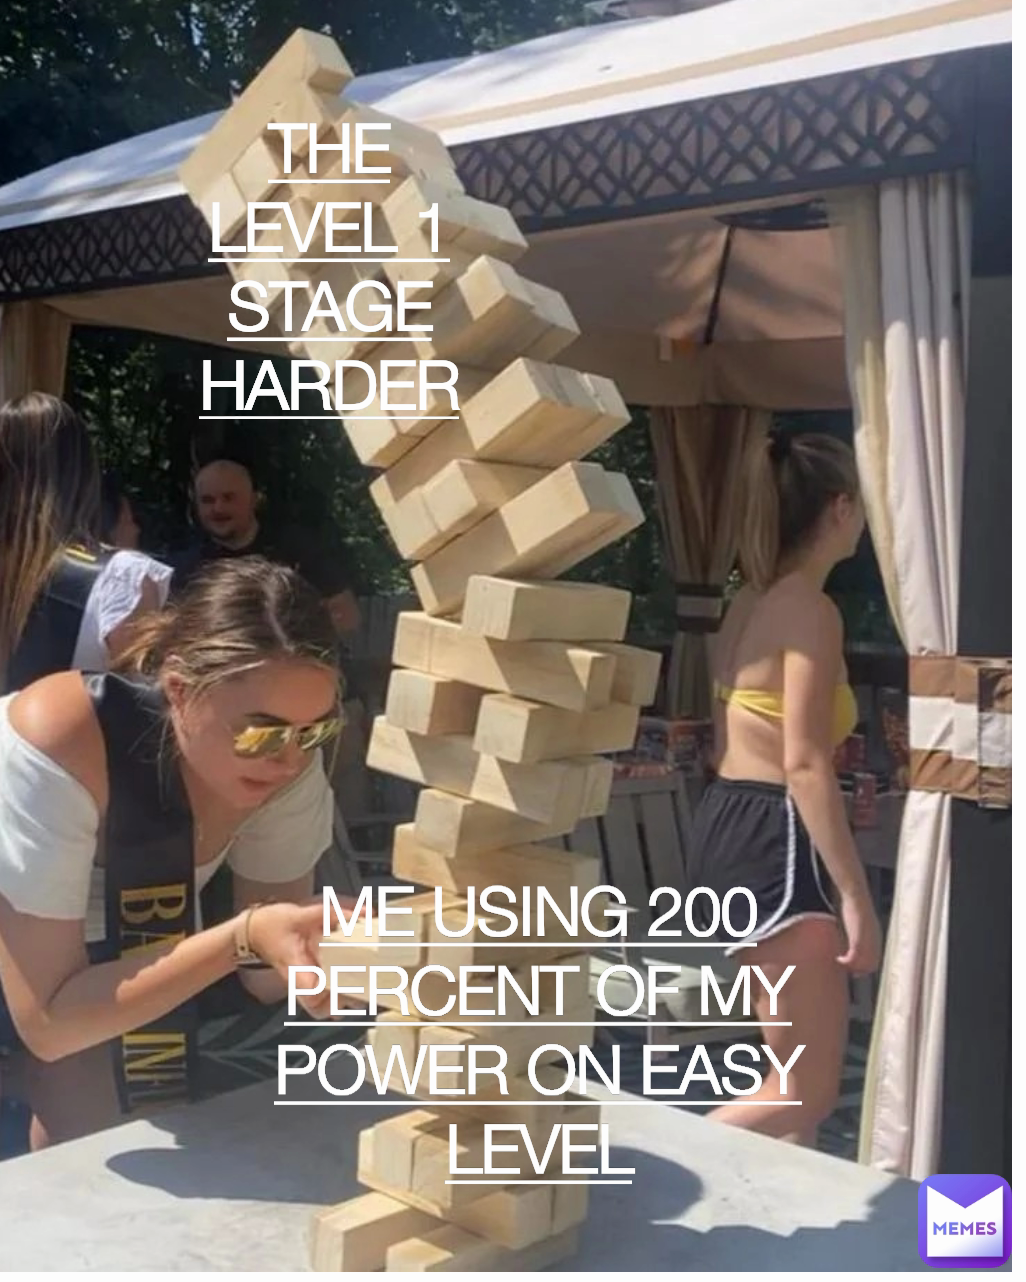 THE LEVEL 1 STAGE HARDER AFTER THIS ME USING 200 PERCENT OF MY POWER ON EASY LEVEL